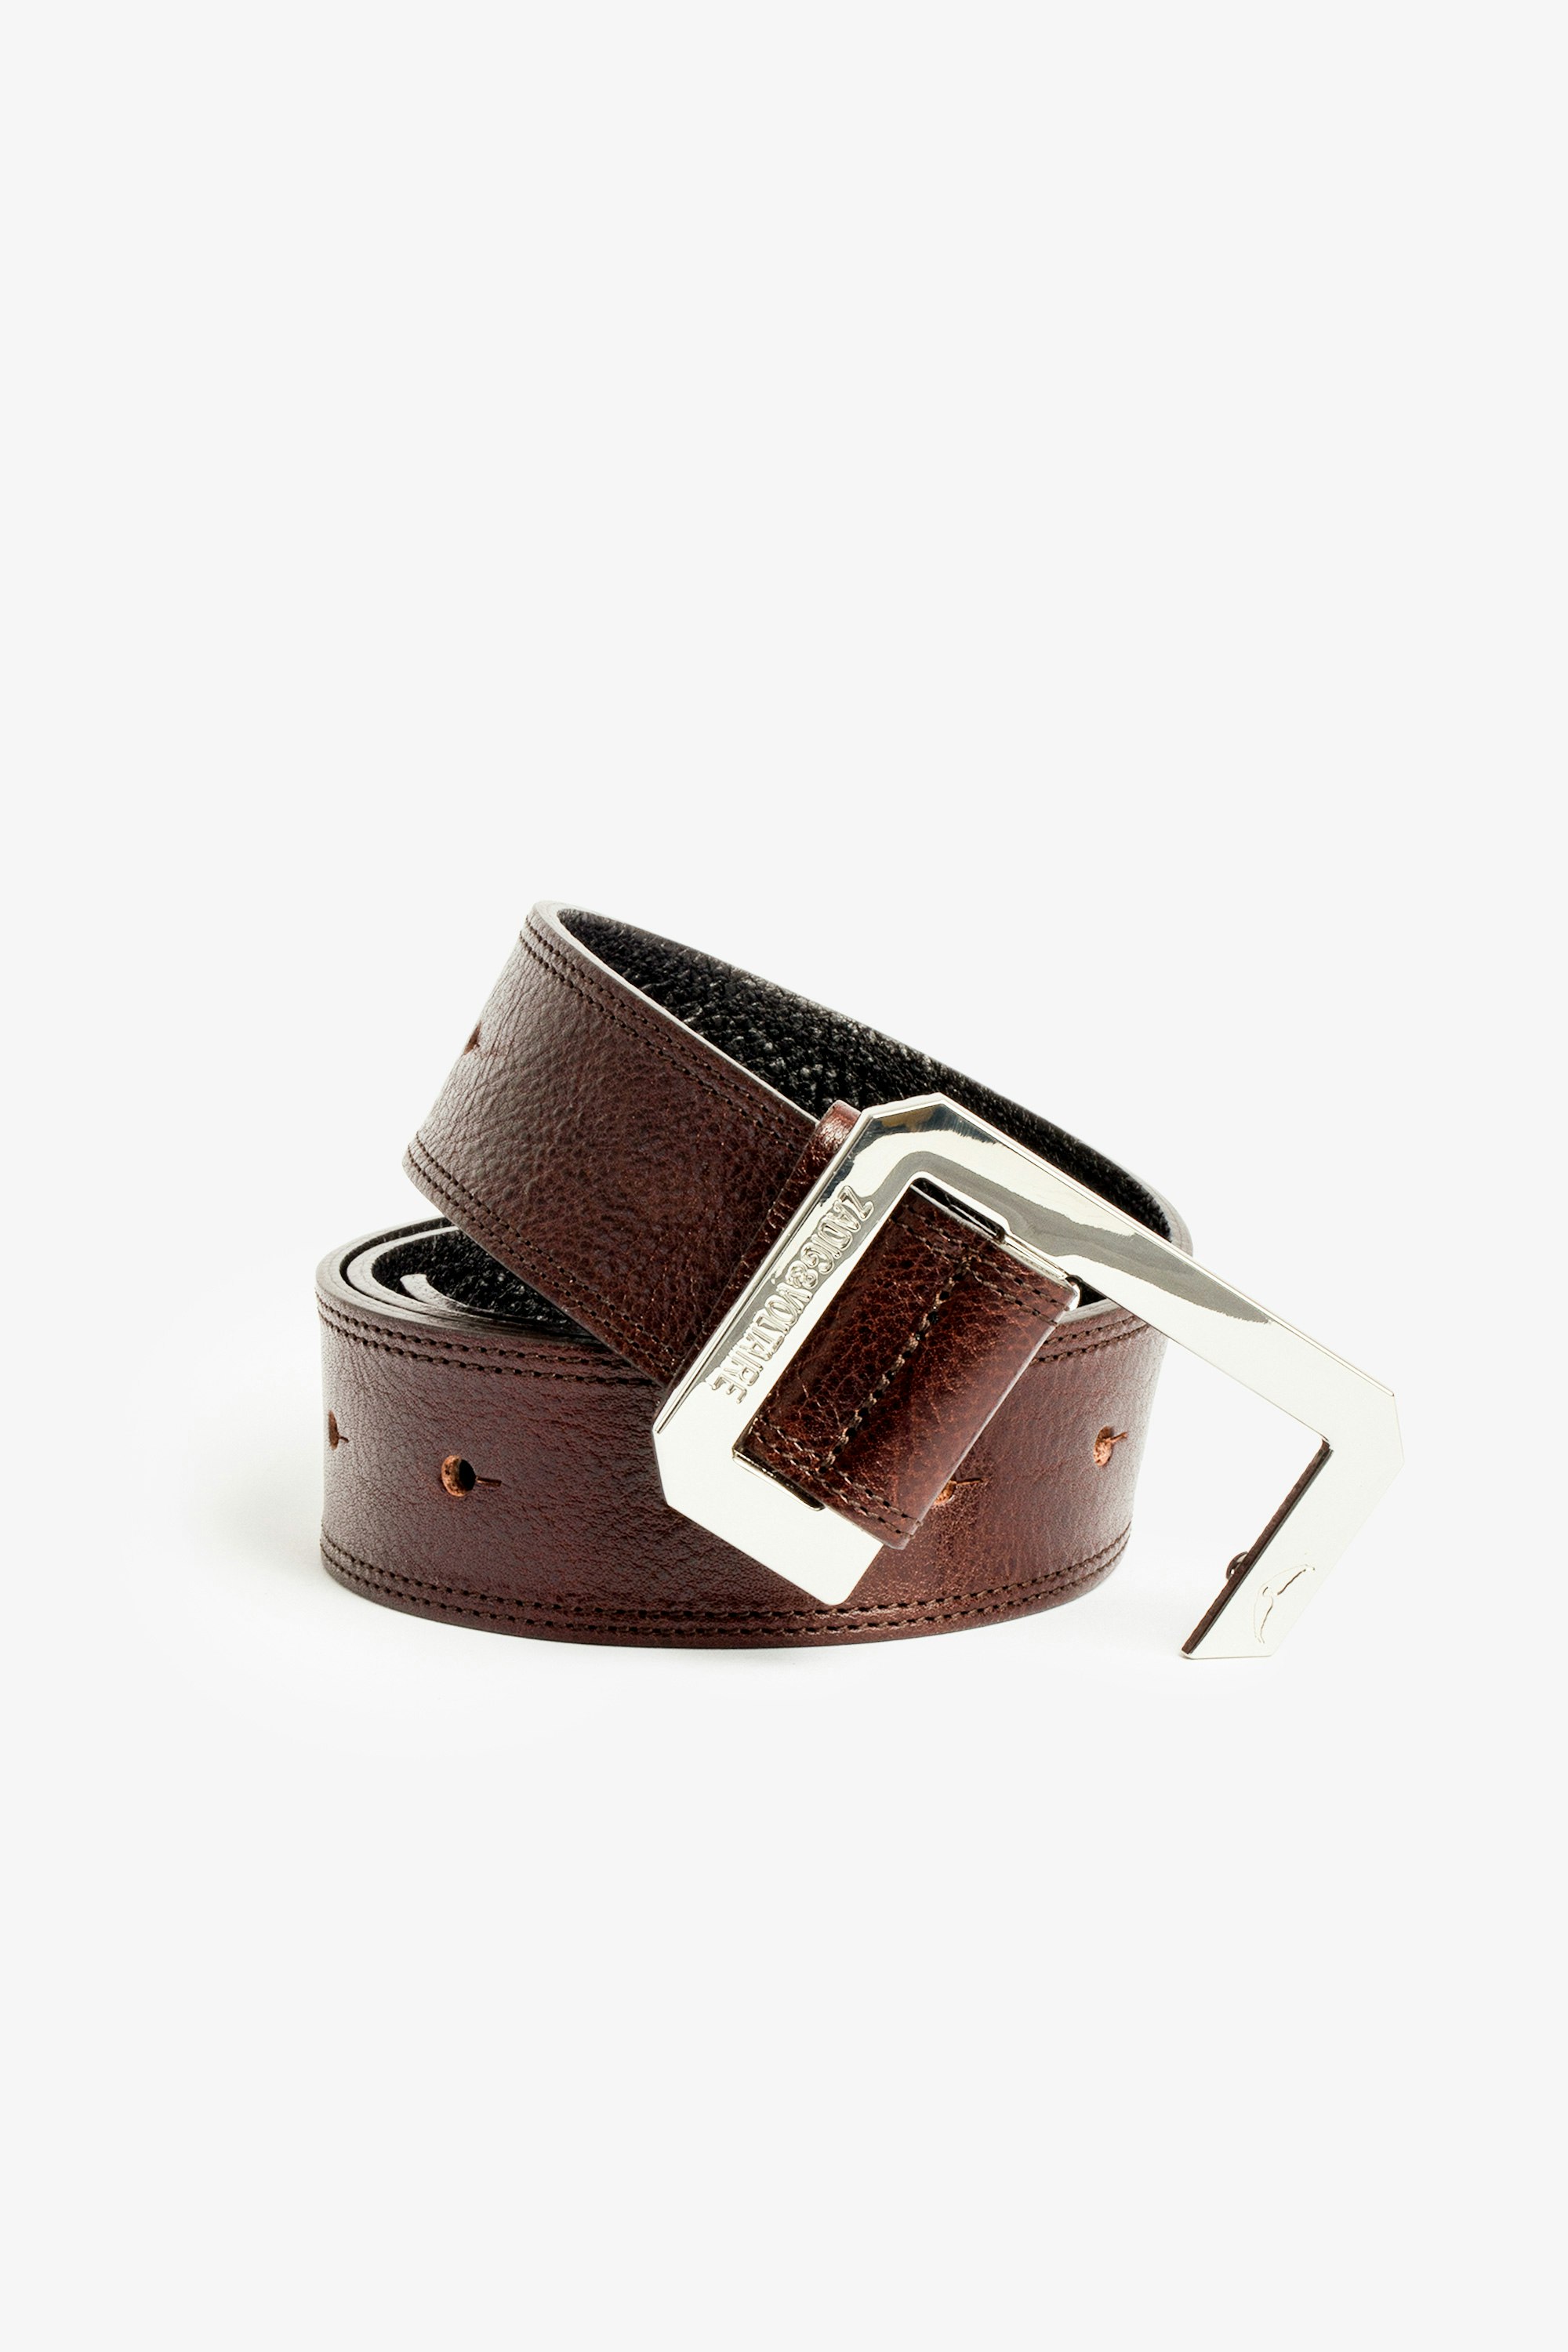 Le Cecilia Belt Leather Women's brown leather belt with C-shaped buckle